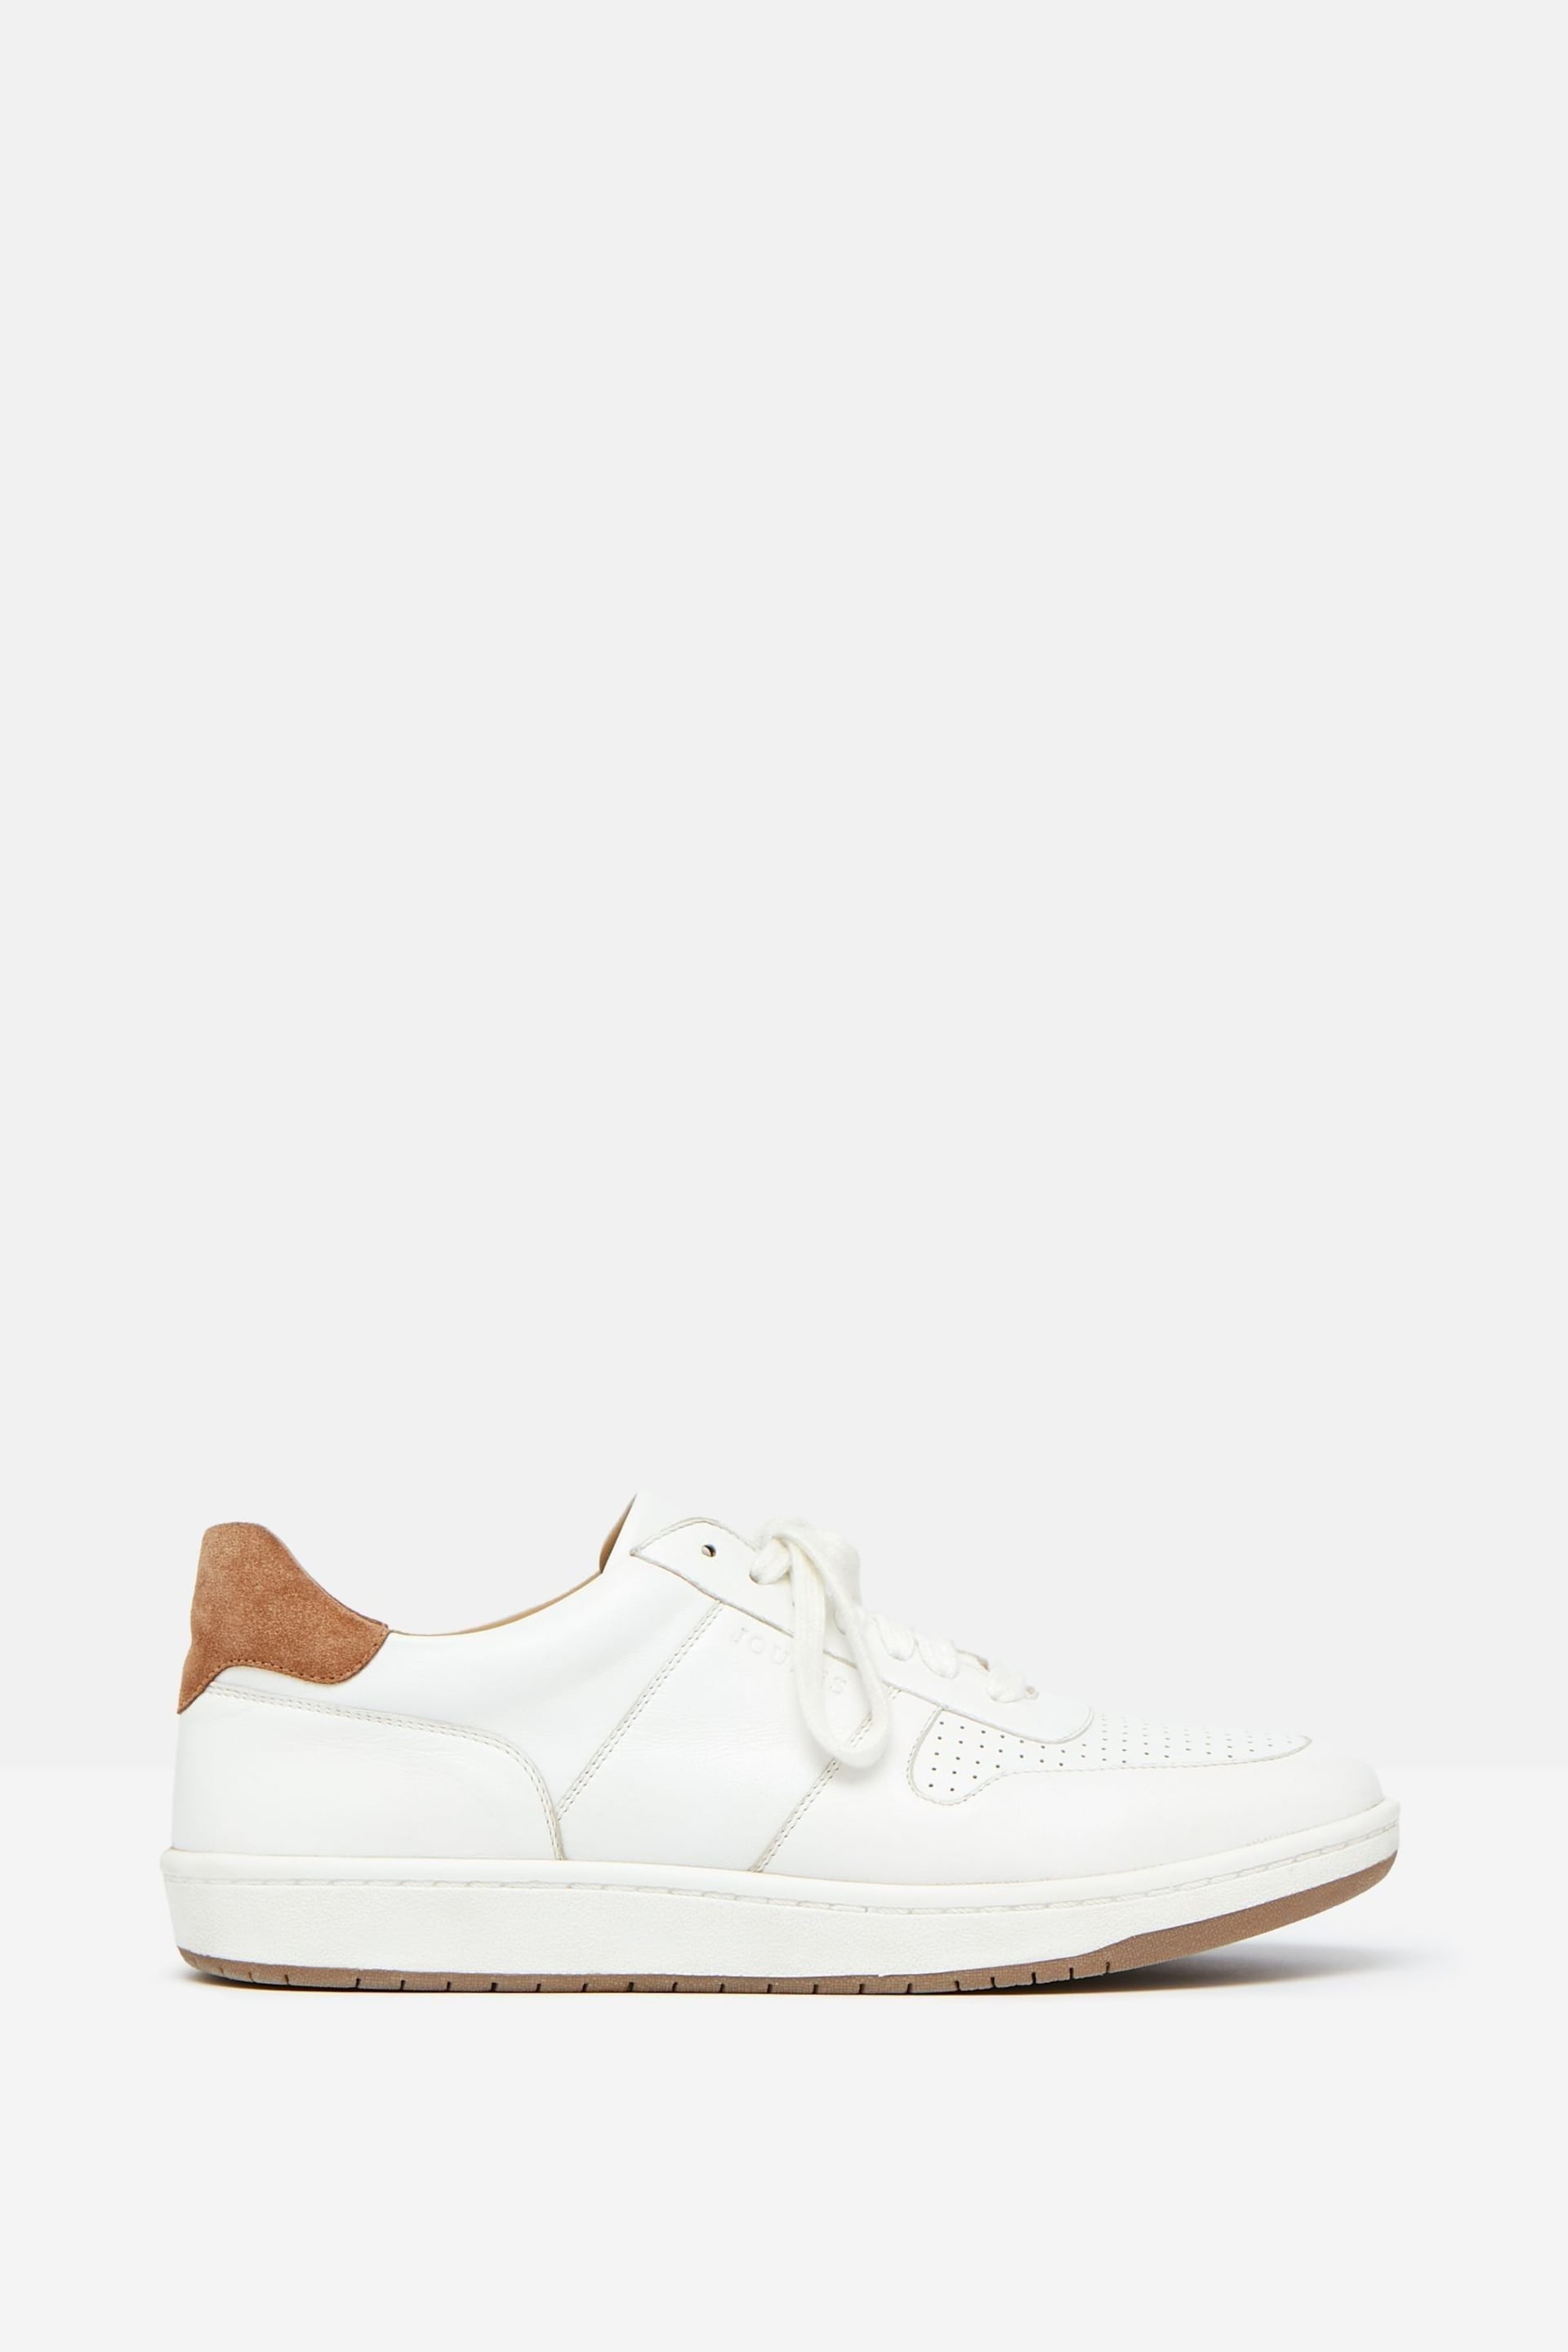 Joules Colston White Leather Trainers - Image 1 of 5